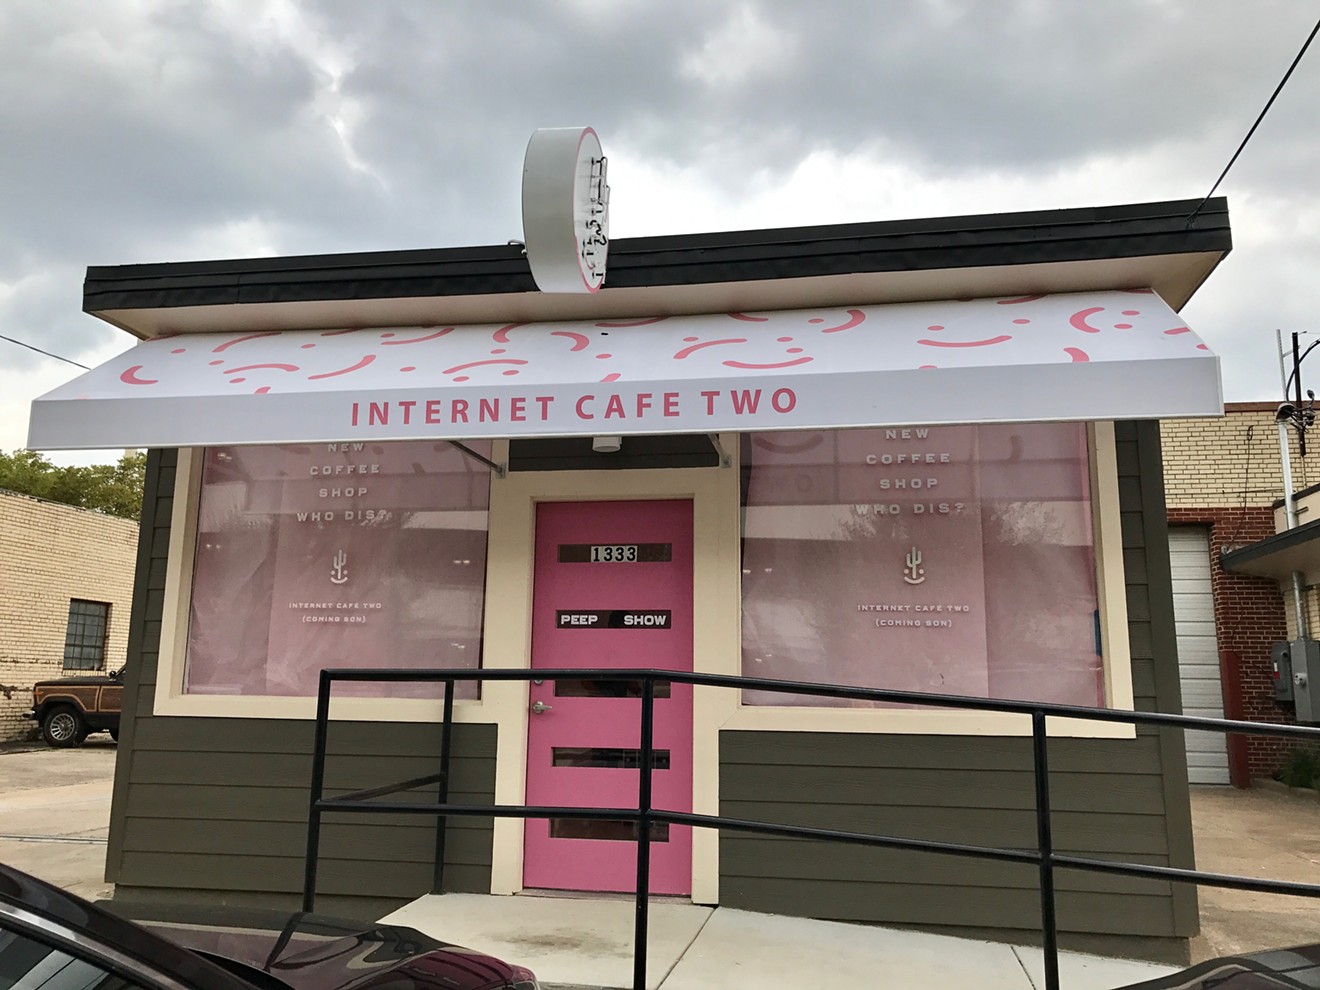 For the last few weeks, Oak Cliffers have been curious about this forthcoming coffee shop that mysteriously popped up on Plowman Avenue.